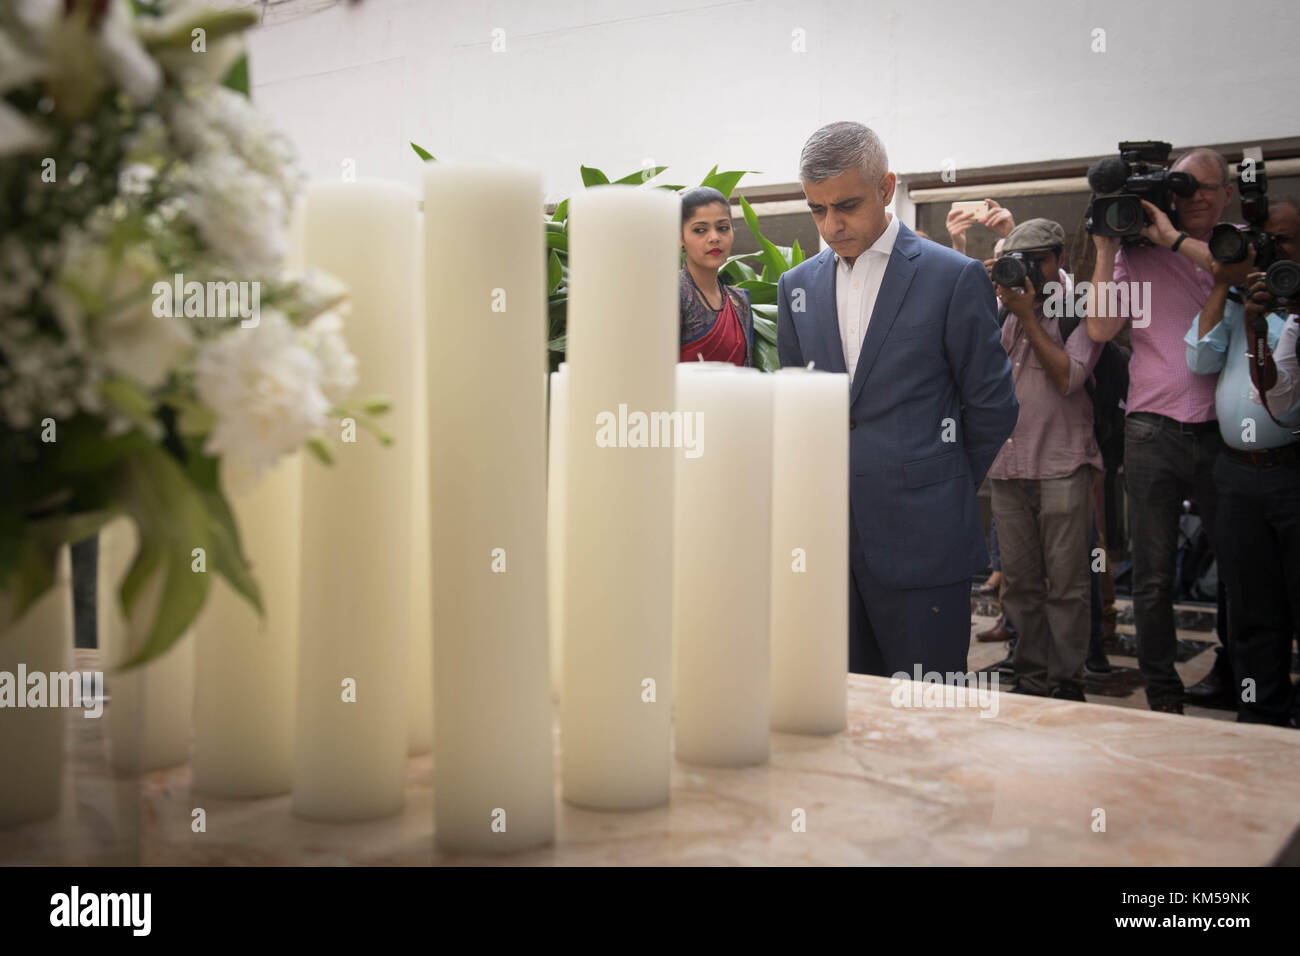 Mayor for London,Sadiq Khan pays his respects at a memorial in the Taj Mahal Palace Hotel in Mumbai for the victims of the 2008 terrorist attack on the hotel. The mayor is on a week long visit to the region to promote London and strengthen commercial and cultural ties with both Indian and Pakistani cities. Stock Photo